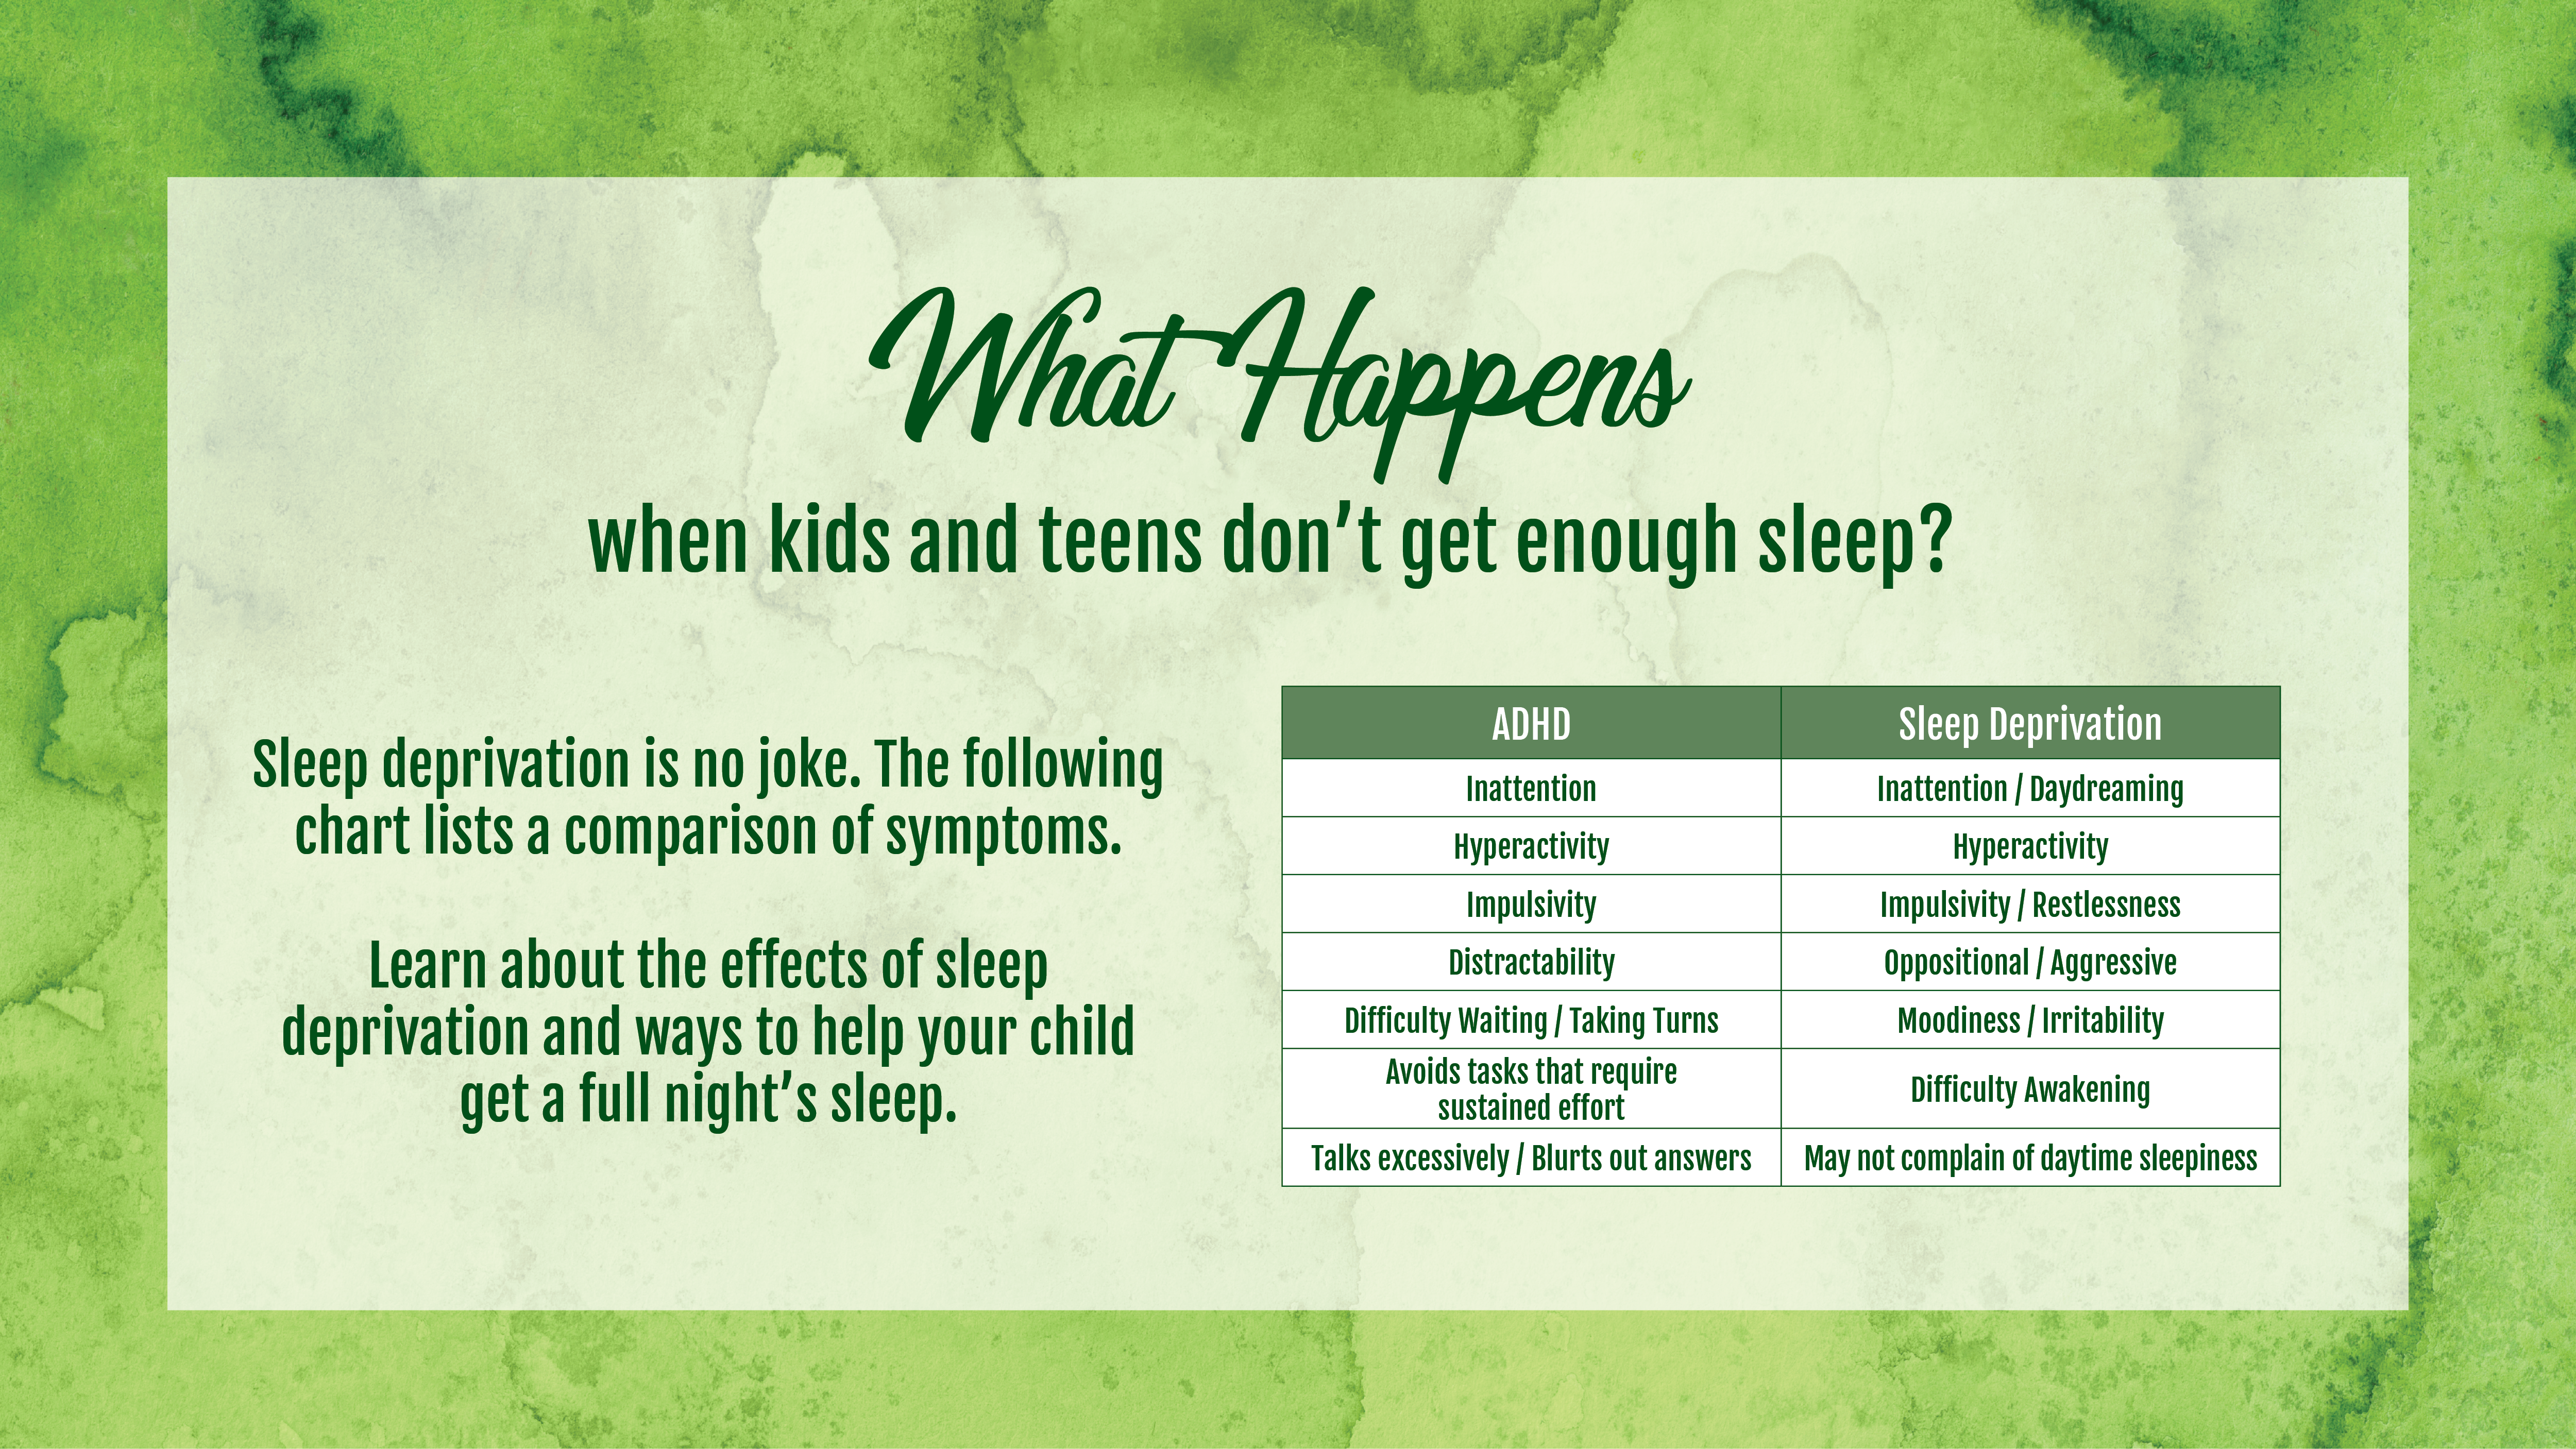 What happens when kids and teens don't get enough sleep?